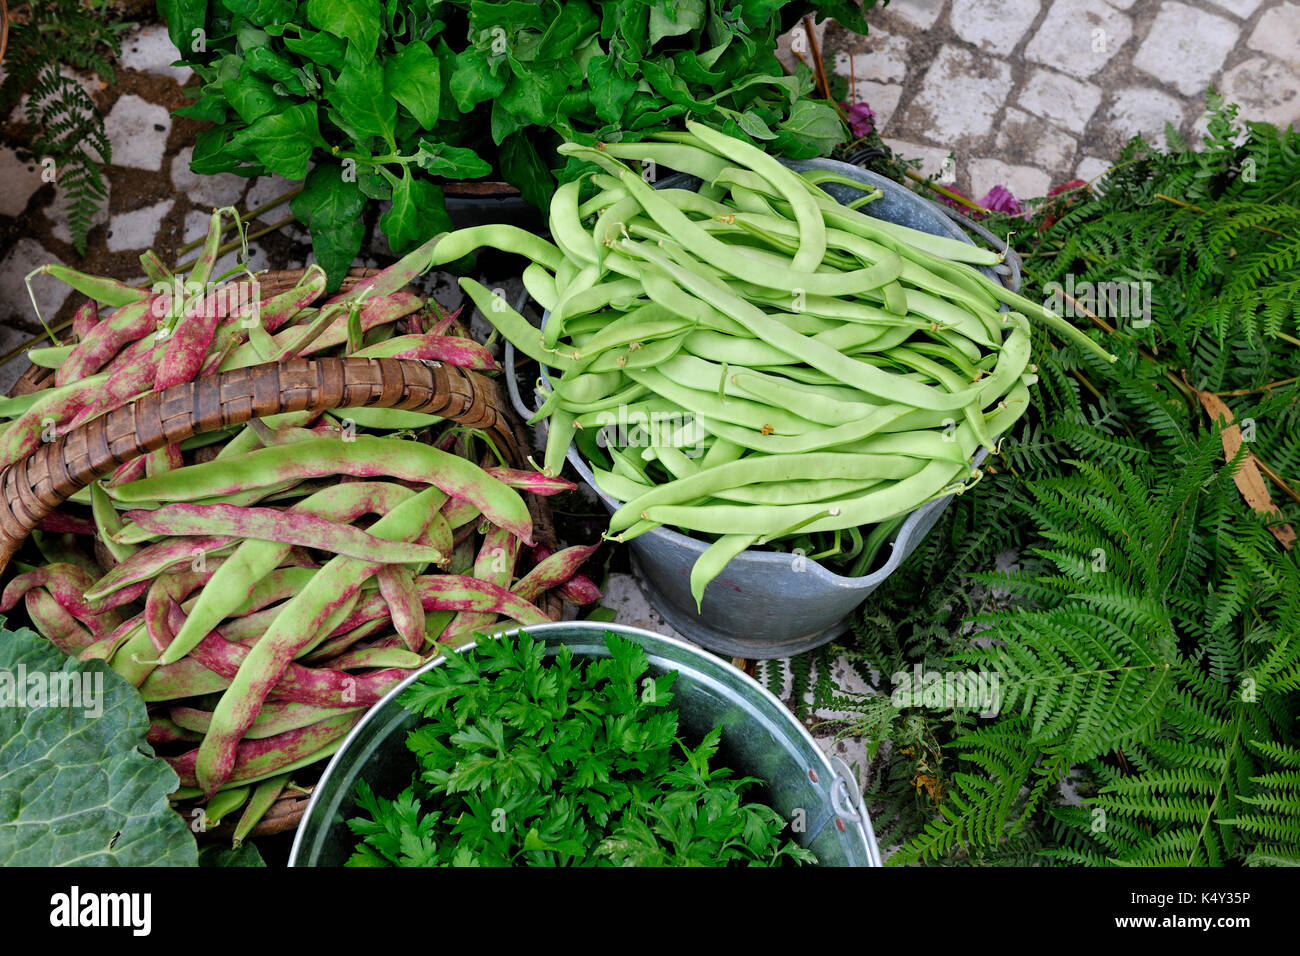 Green beans and Parsley (salsa). Food market, Lisbon. Portugal Stock Photo